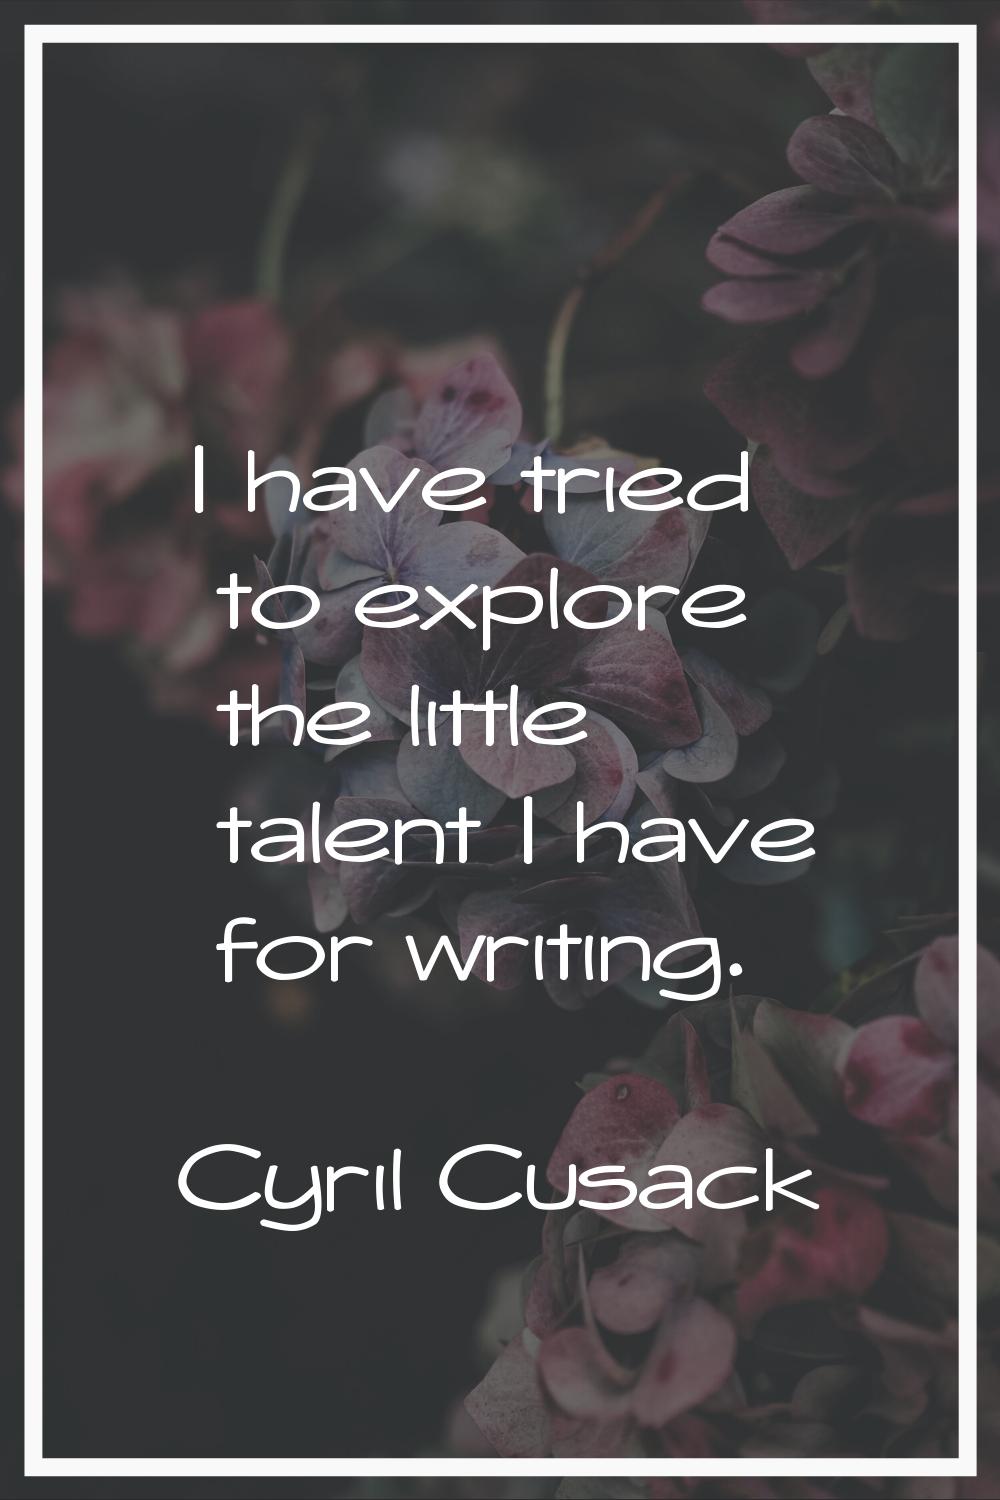 I have tried to explore the little talent I have for writing.